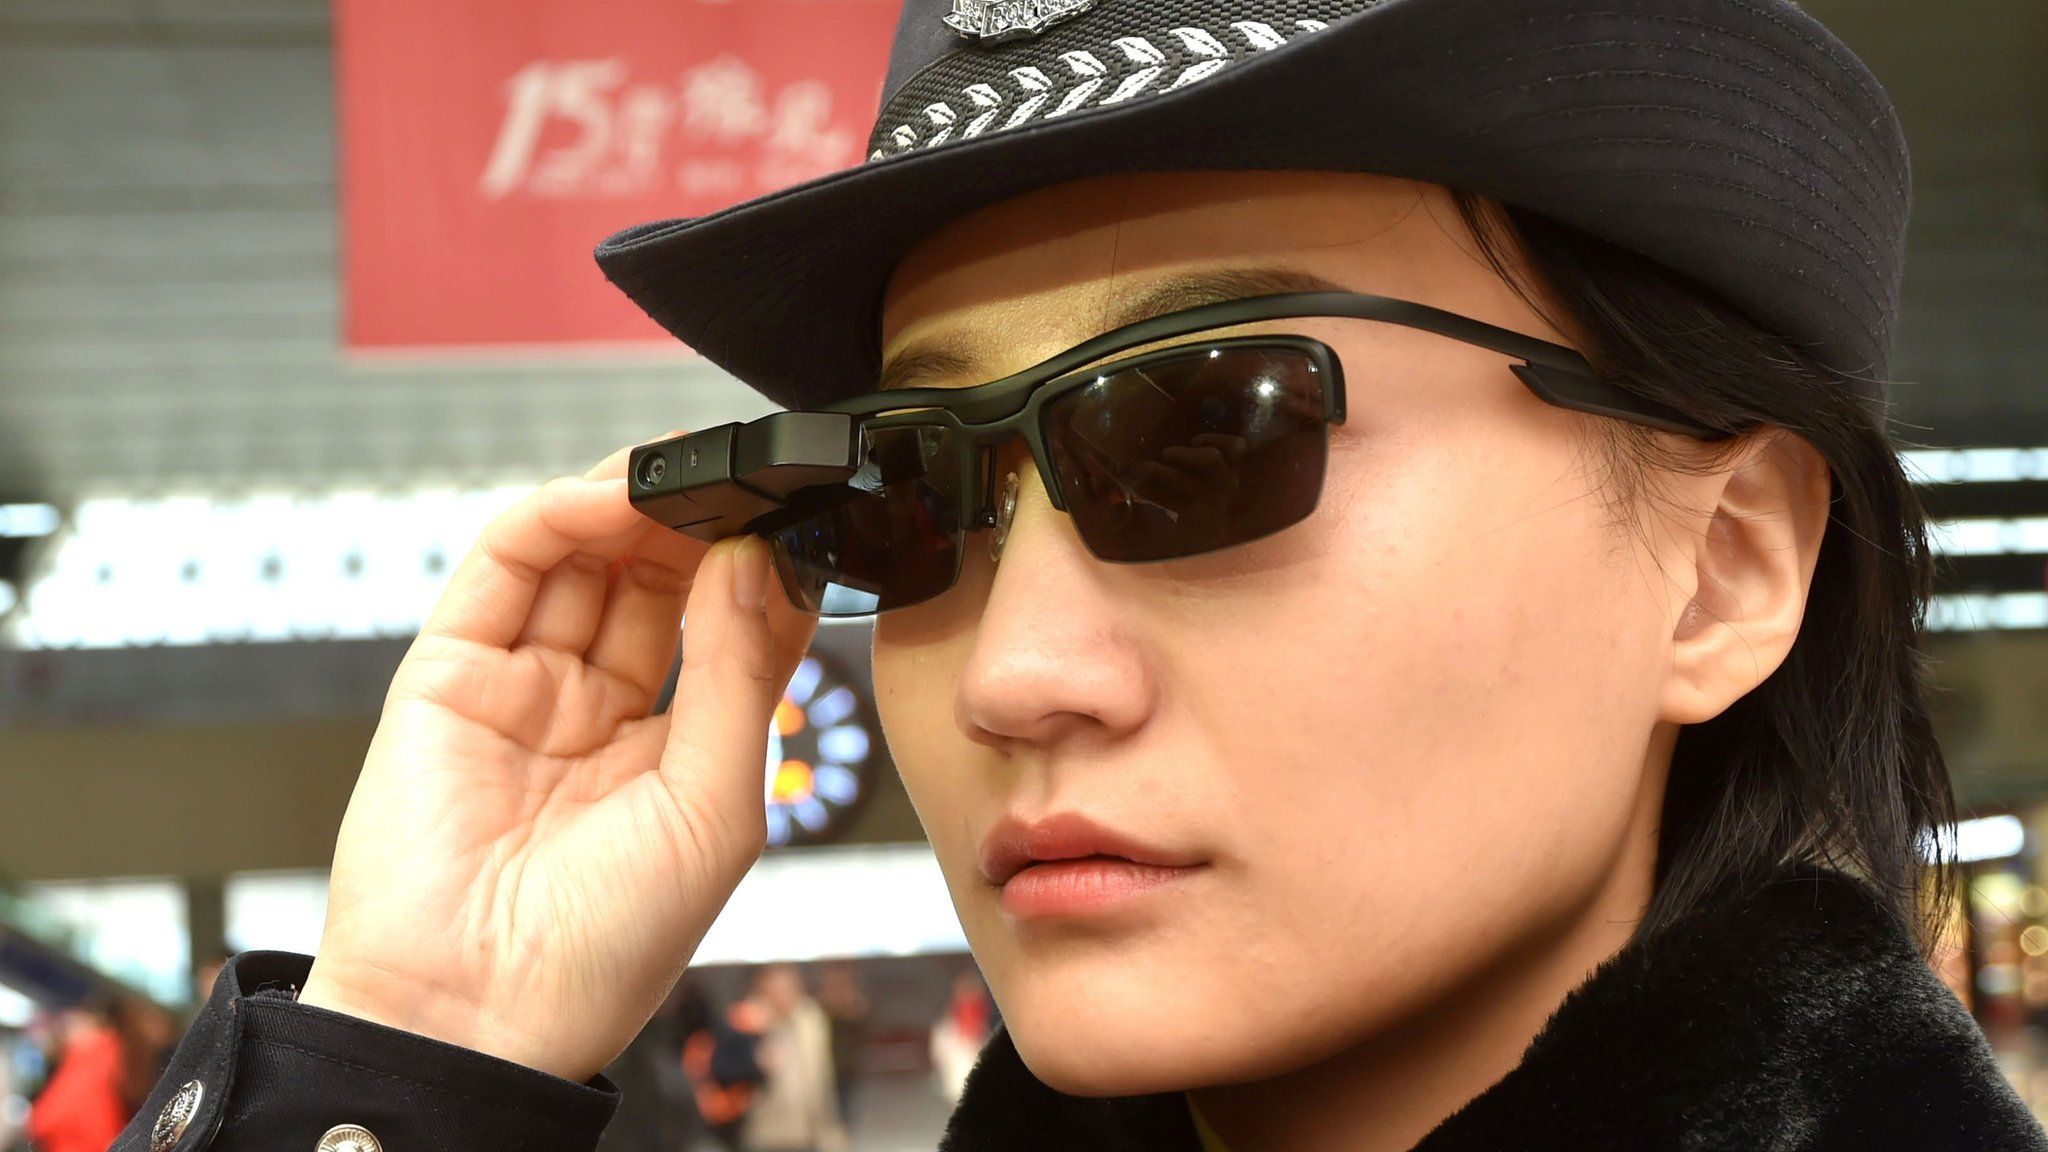 Image shows a police officer wearing a pair of sunglasses with a facial recognition system at Zhengzhou East Railway Station in Zhengzhou in China's central Henan province.